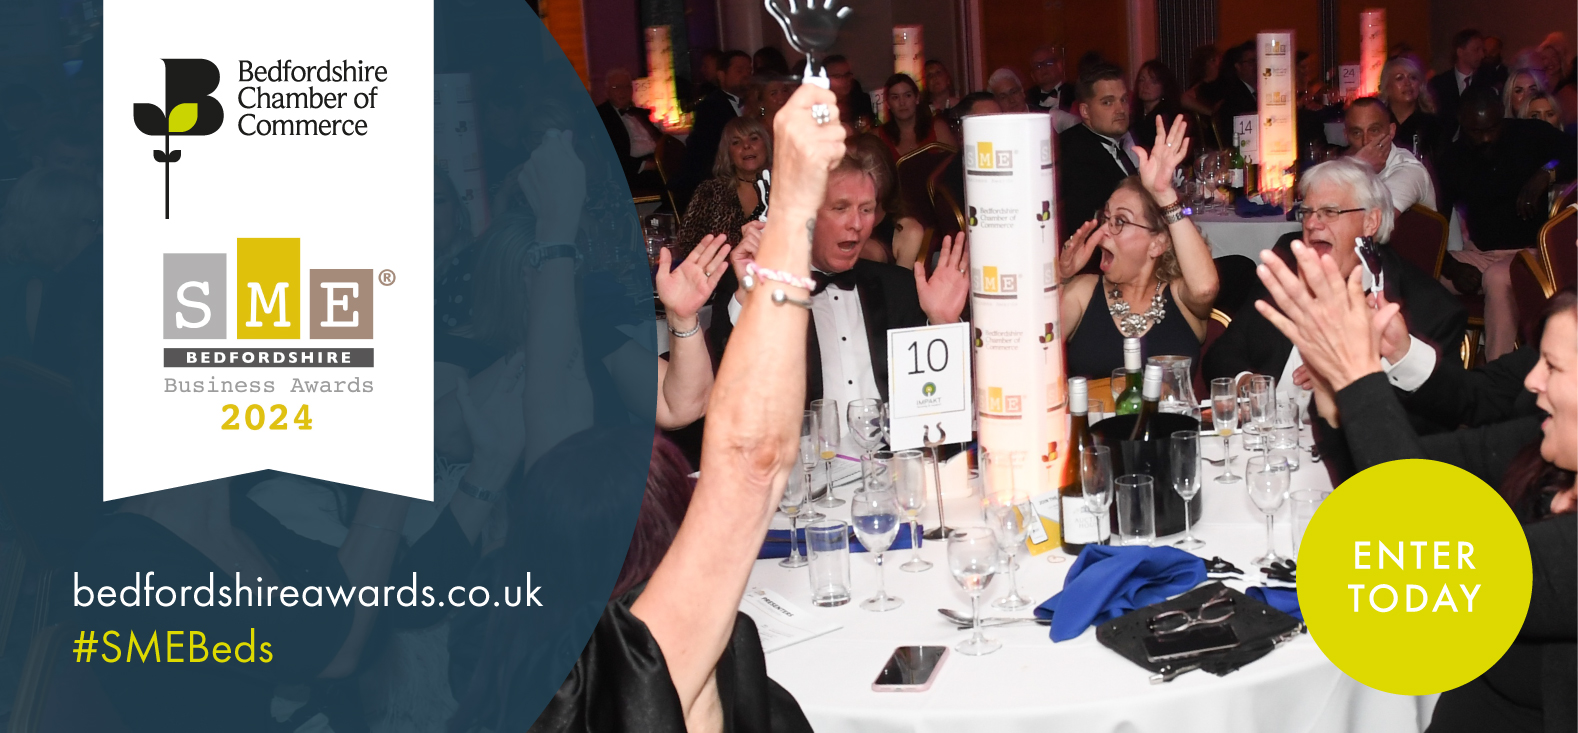 SME Bedfordshire Business Awards 2024: Don’t Miss Your Chance to Shine!